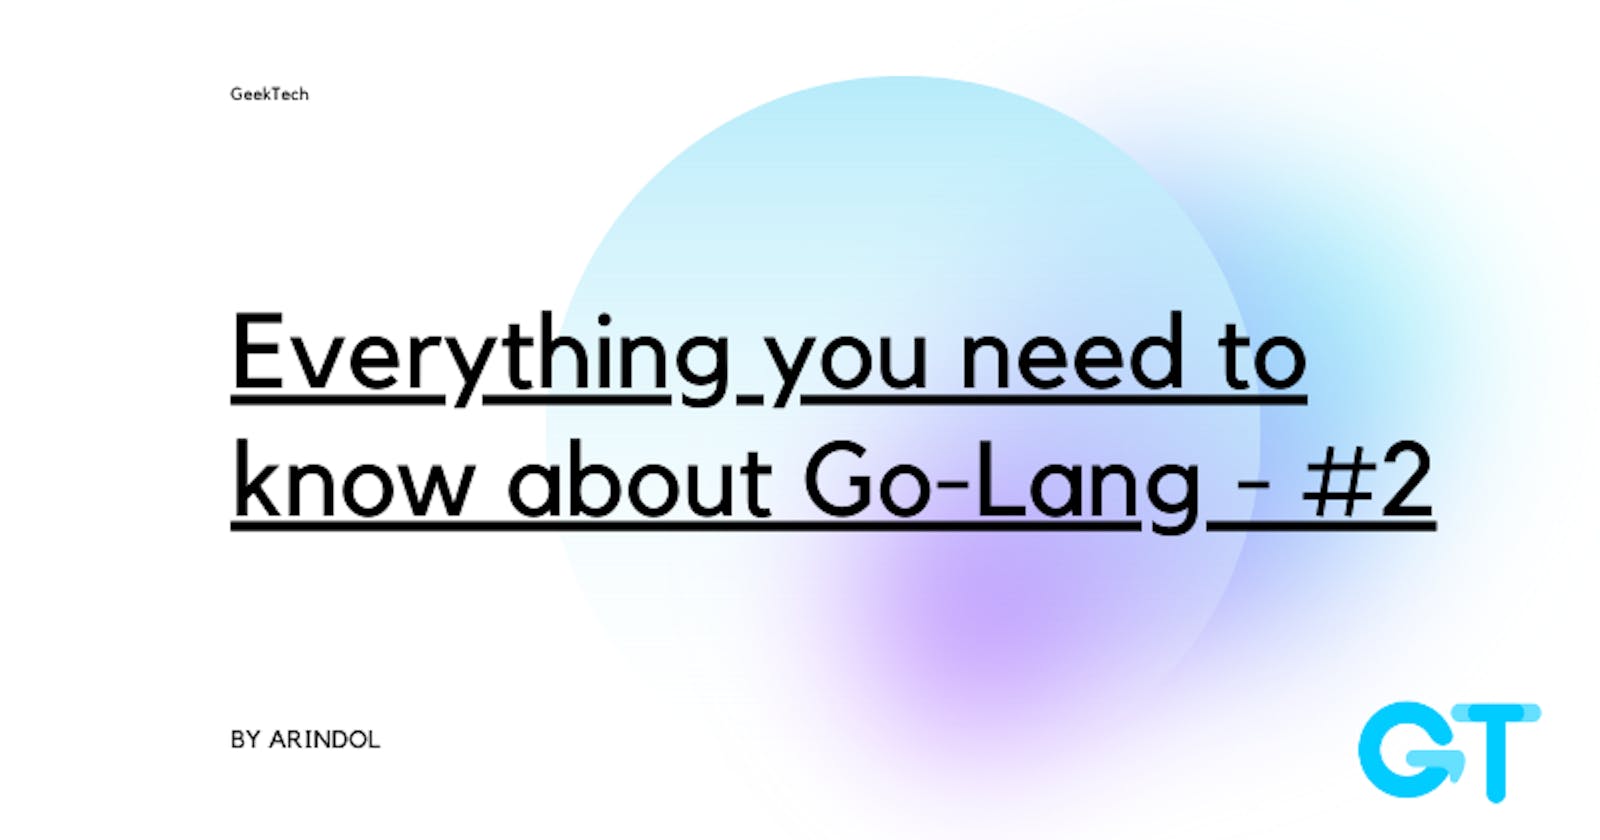 Everything you need to know about Go-Lang - #2